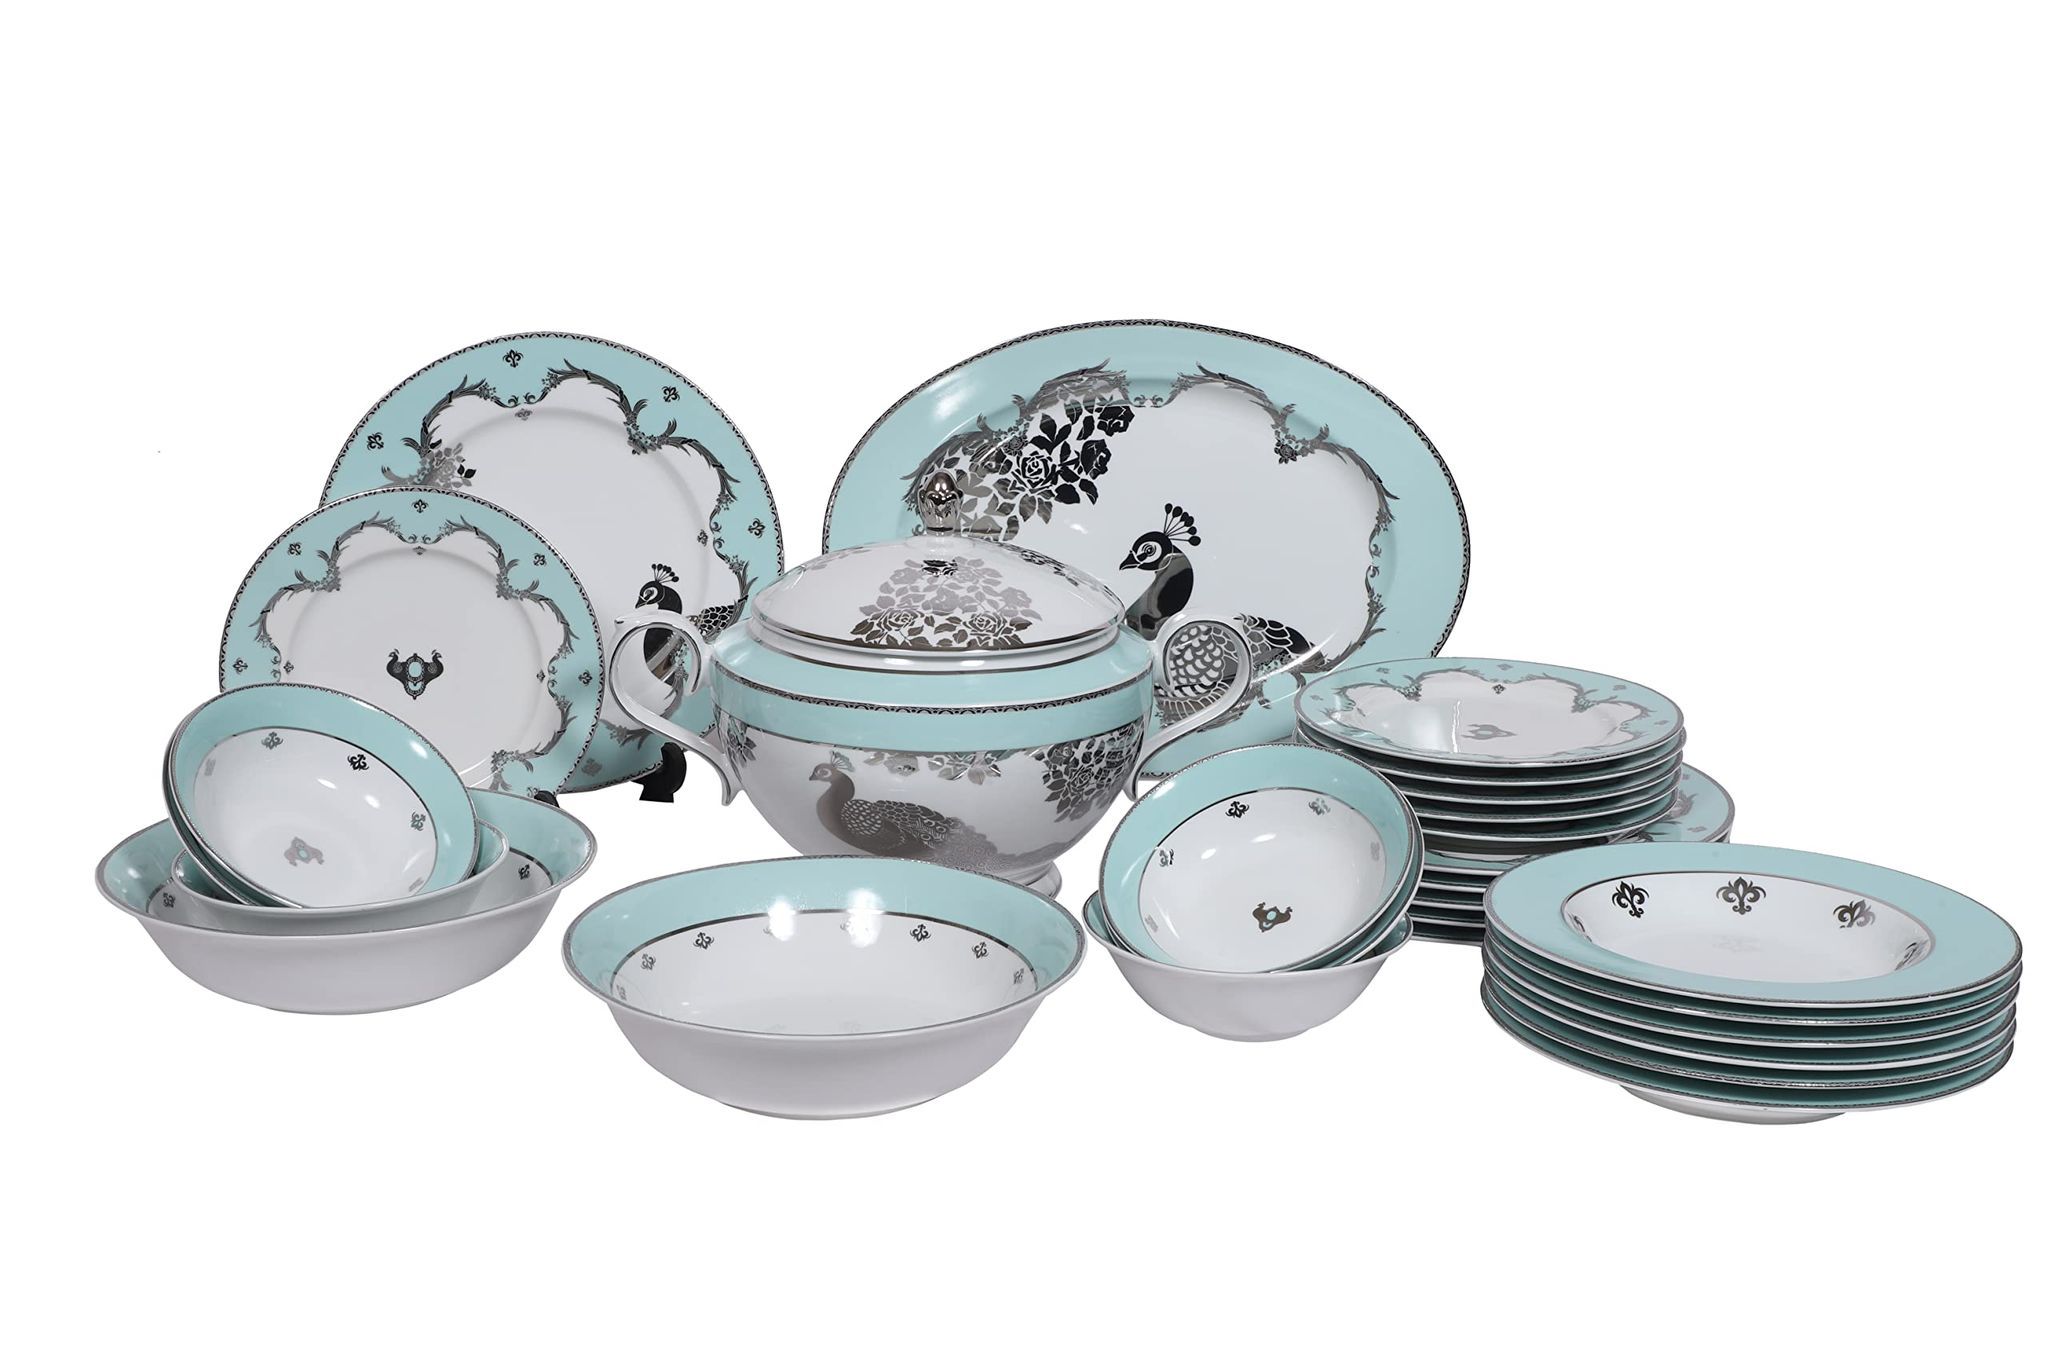 LE TAUCI Dinnerware Sets 12 Piece, Serve for 4, Ceramic Plates and Bowls Set  (10